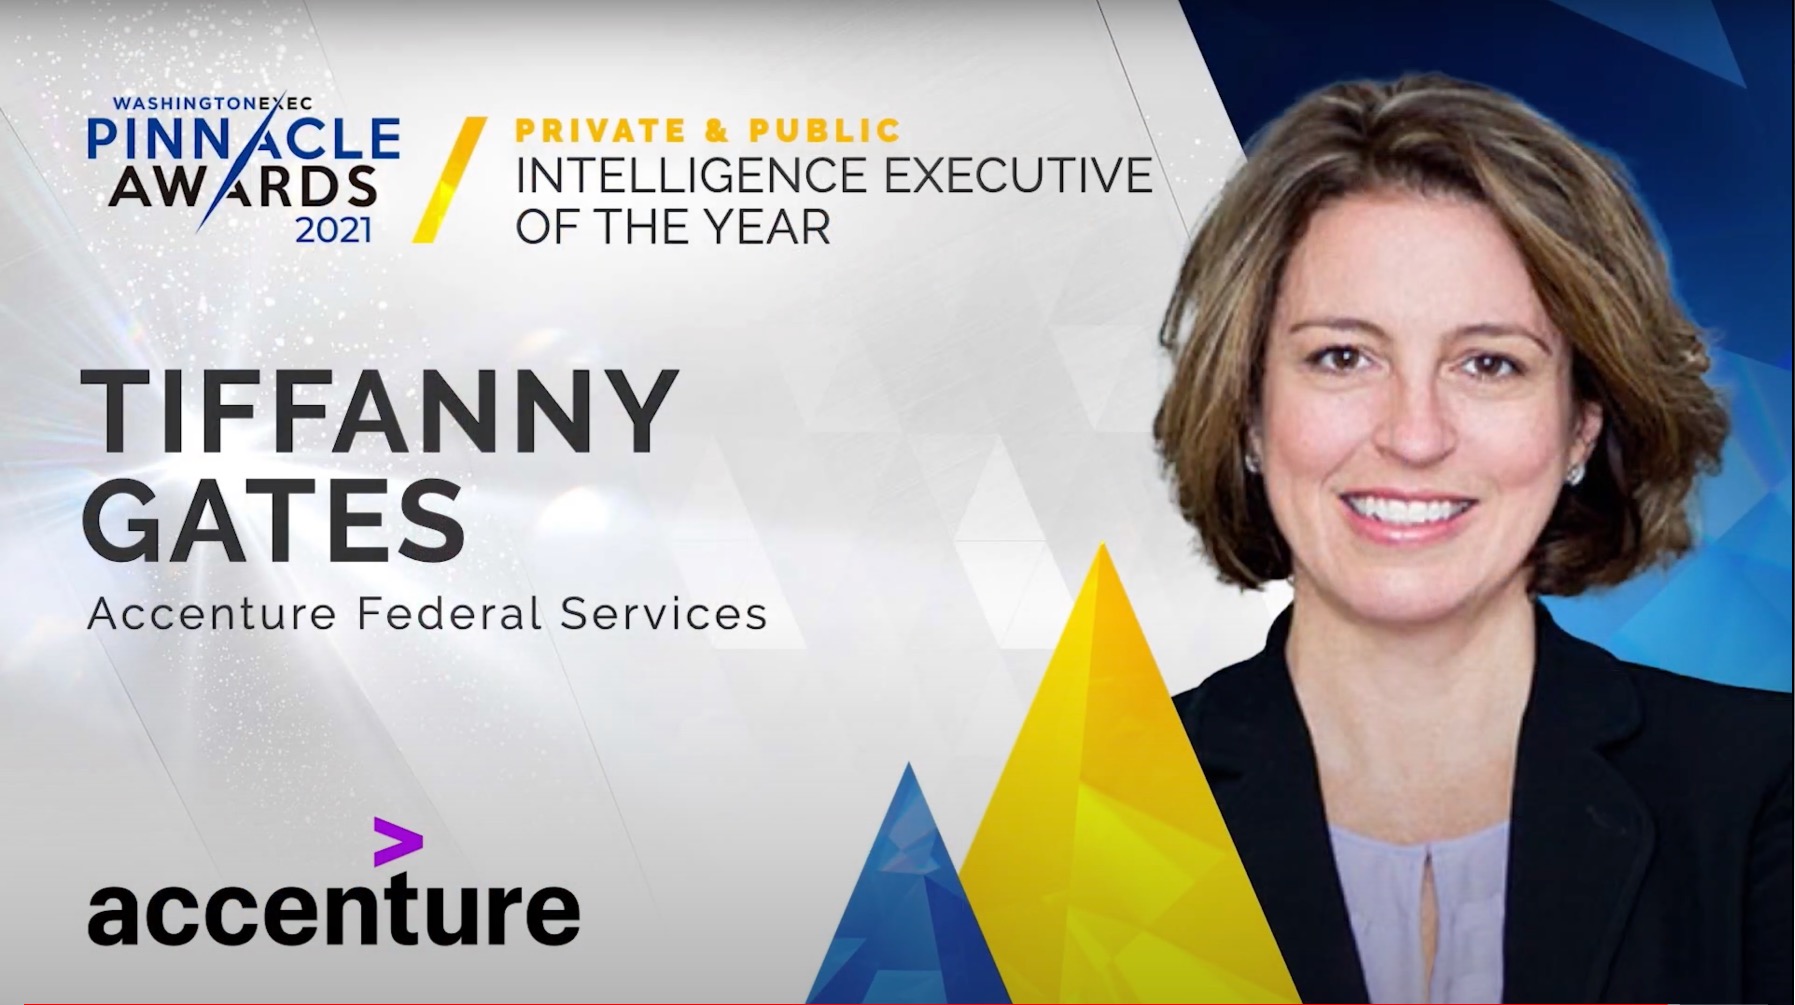 Intel - Congratulations to Tiffanny Gates from Accenture Federal Services on winning the award for Intelligence Executive of the Year in the Private & Public Sectors